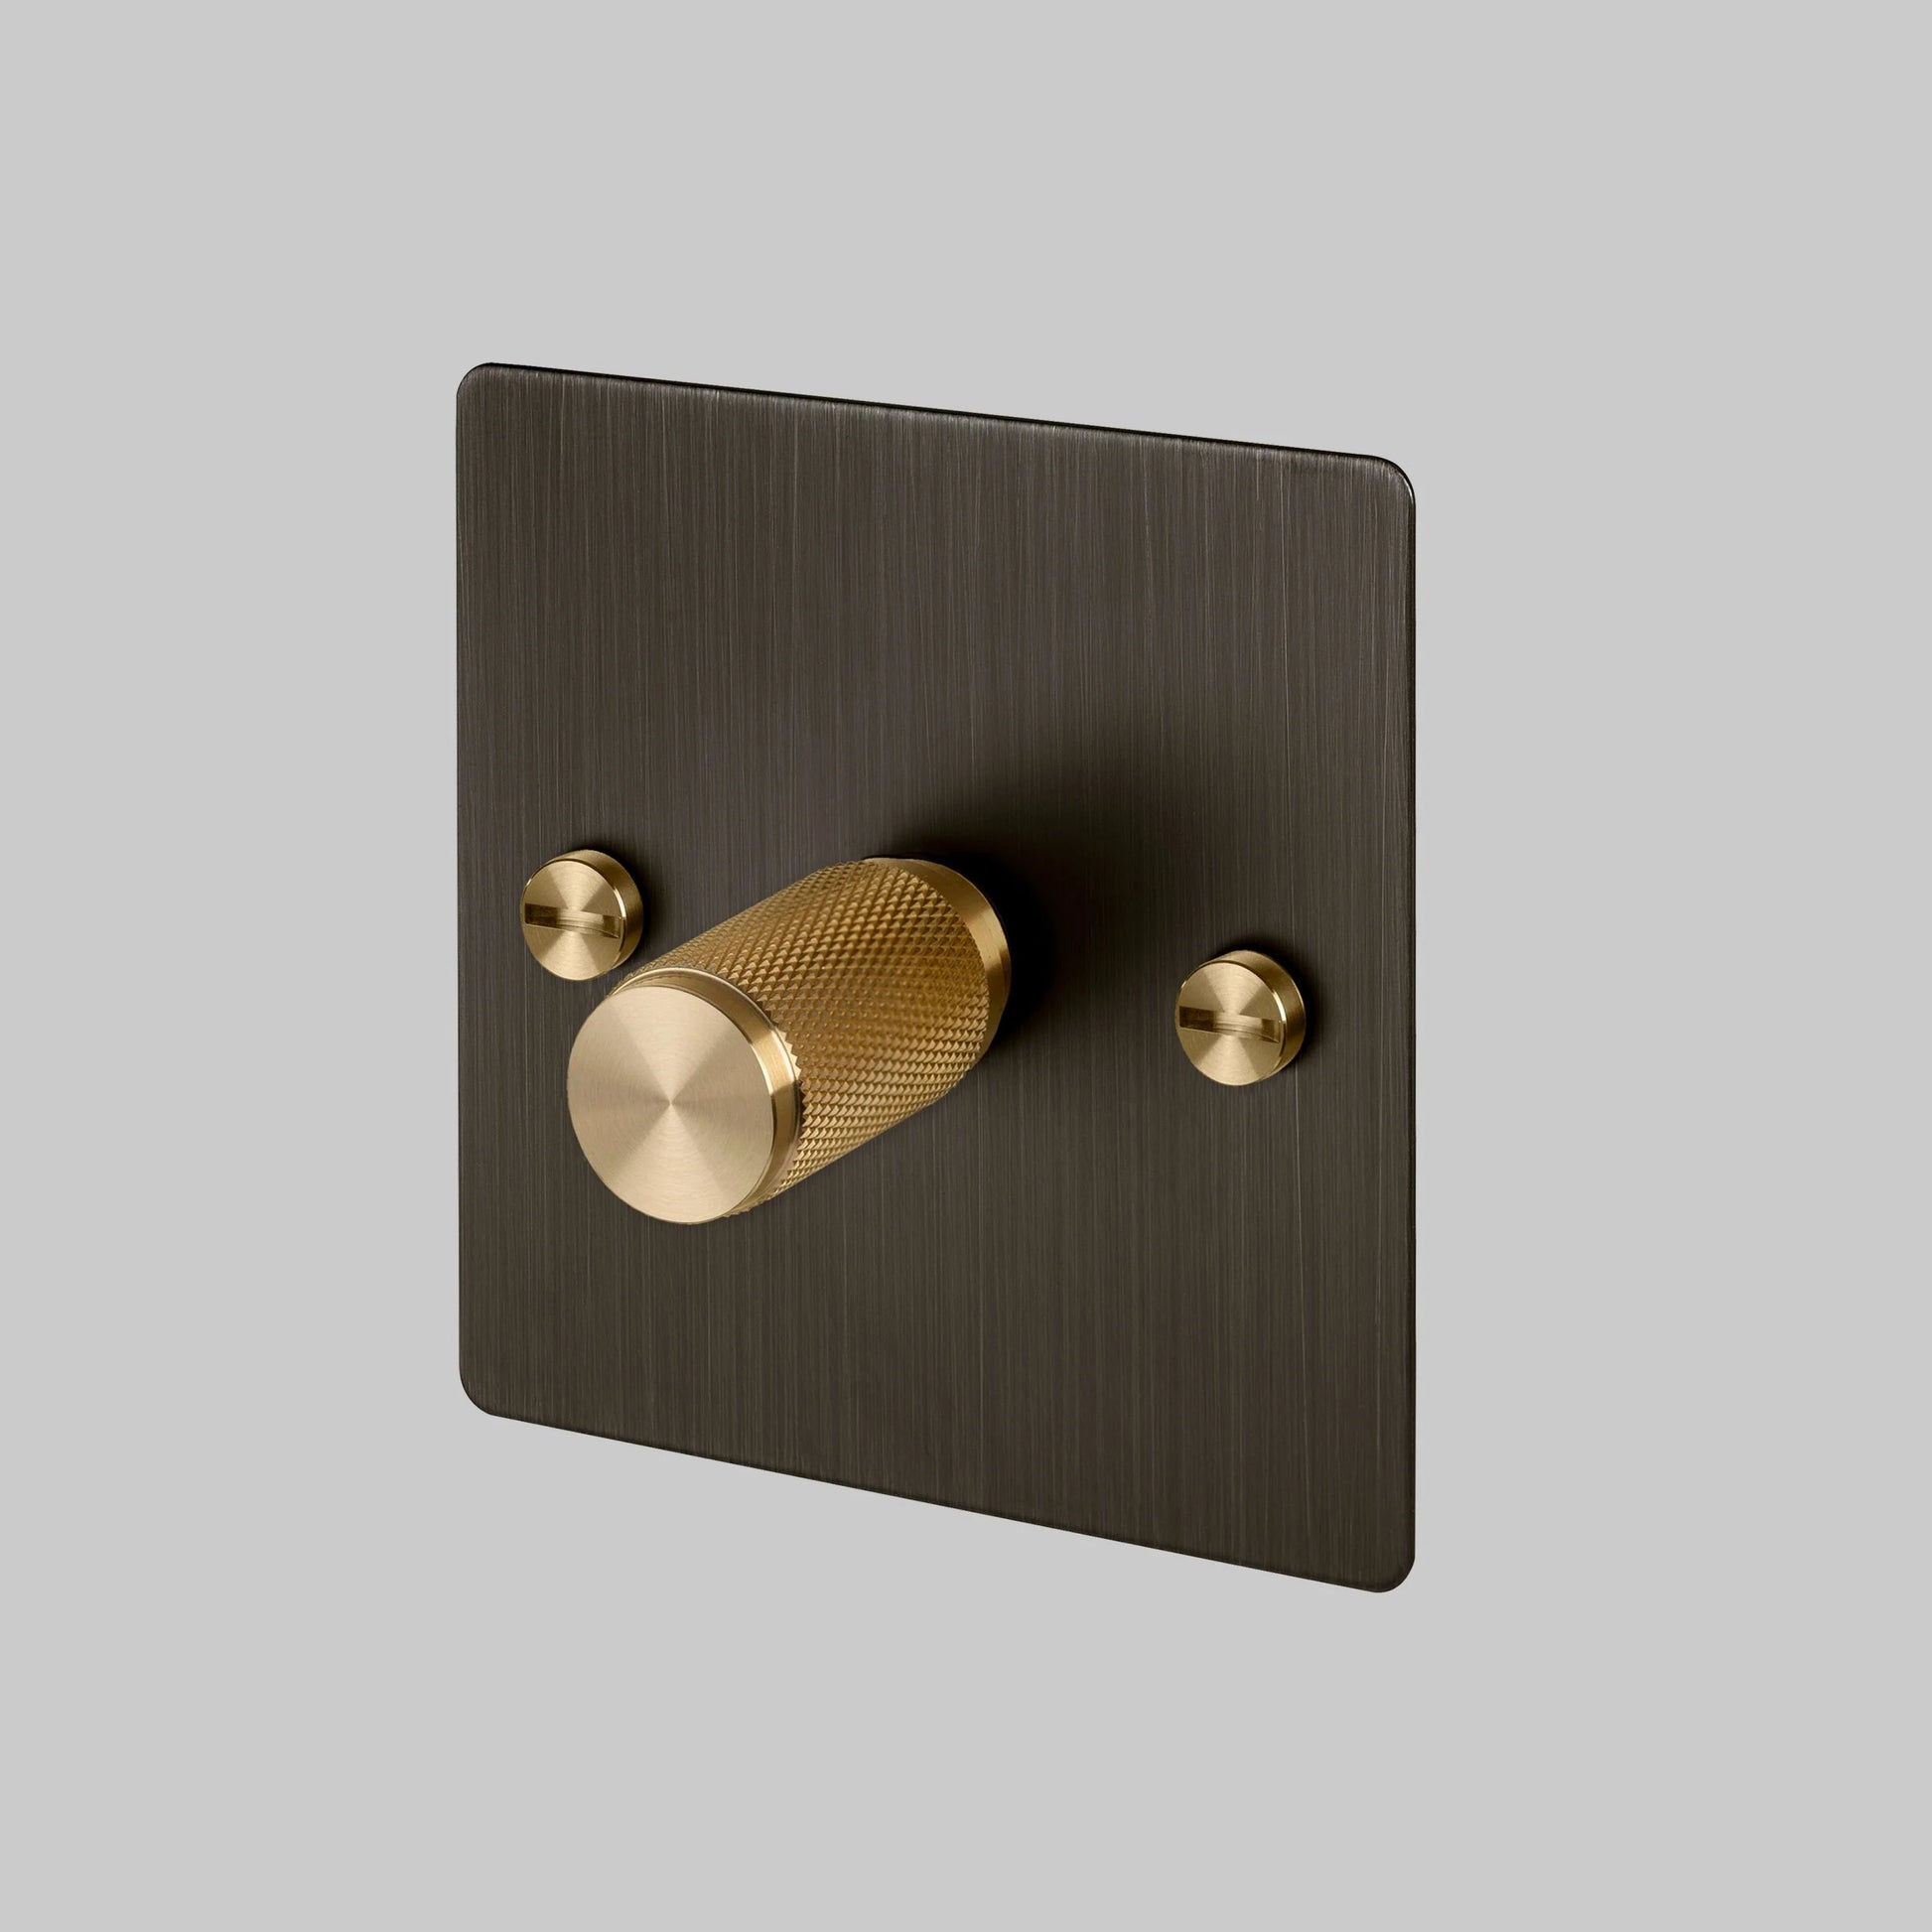 1G Dimmer/ 100W/ Smoked Bronze with brass details, angled view.